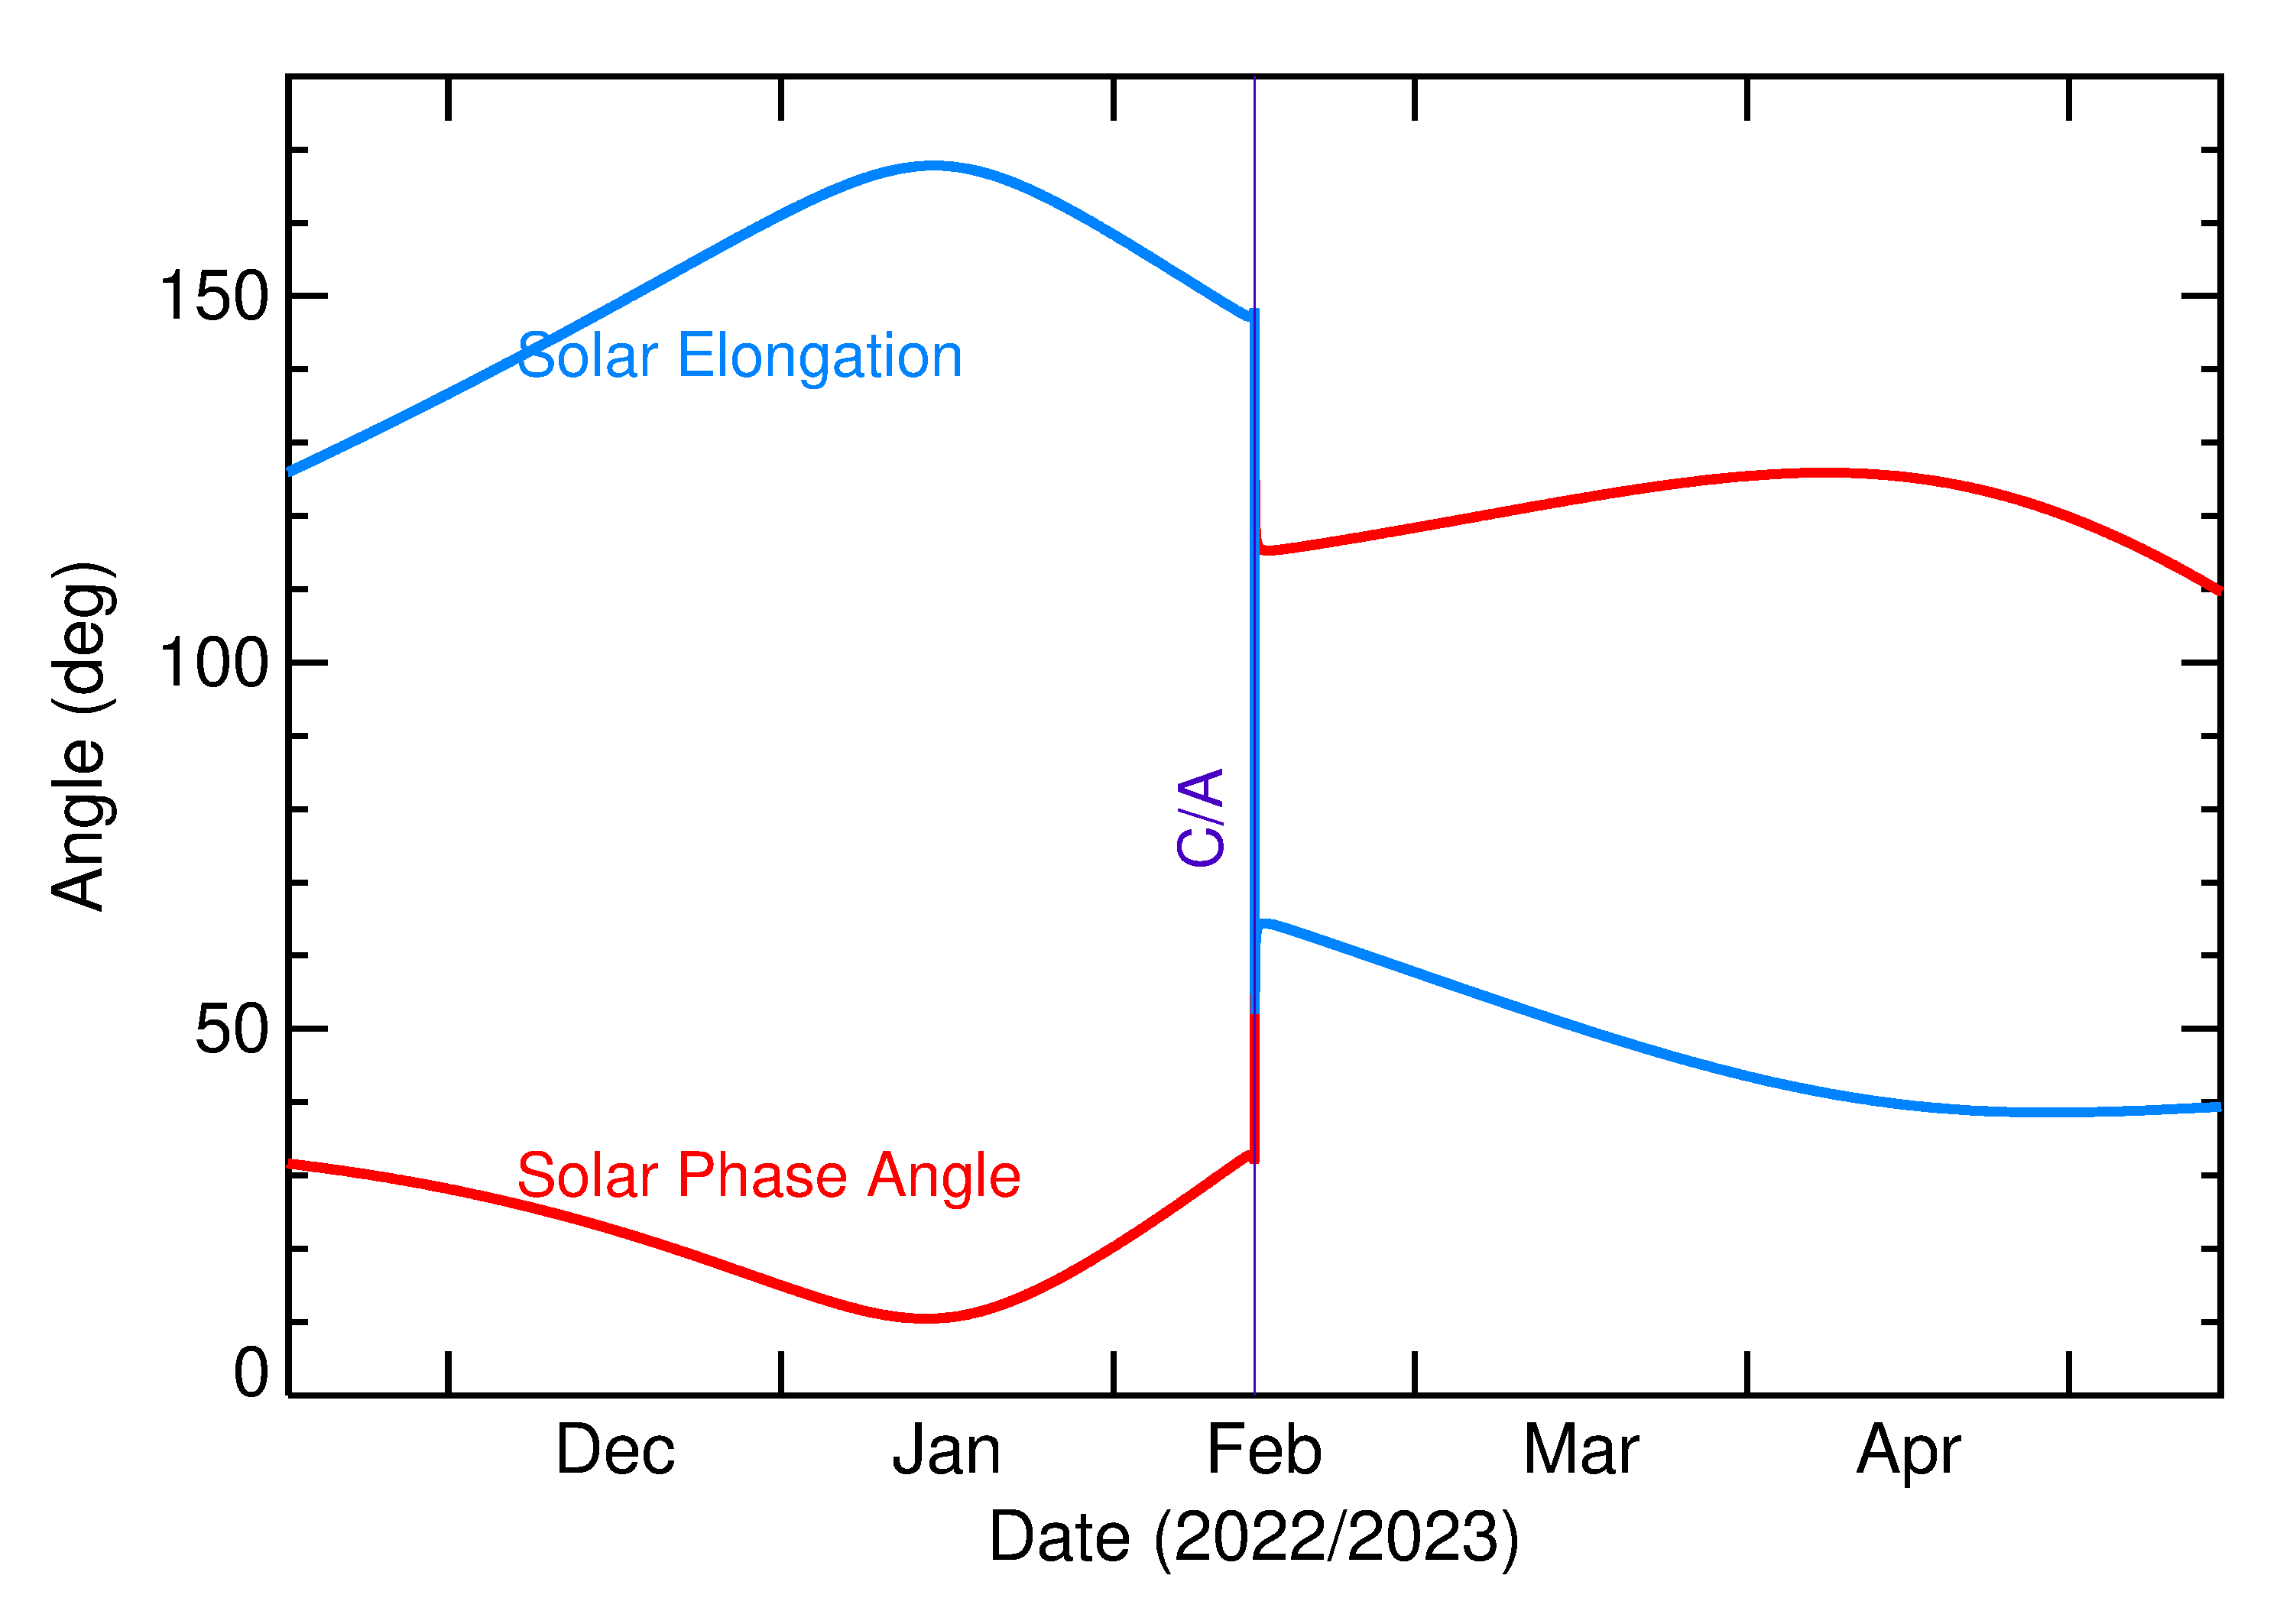 Solar Elongation and Solar Phase Angle of 2023 CX1 in the months around closest approach